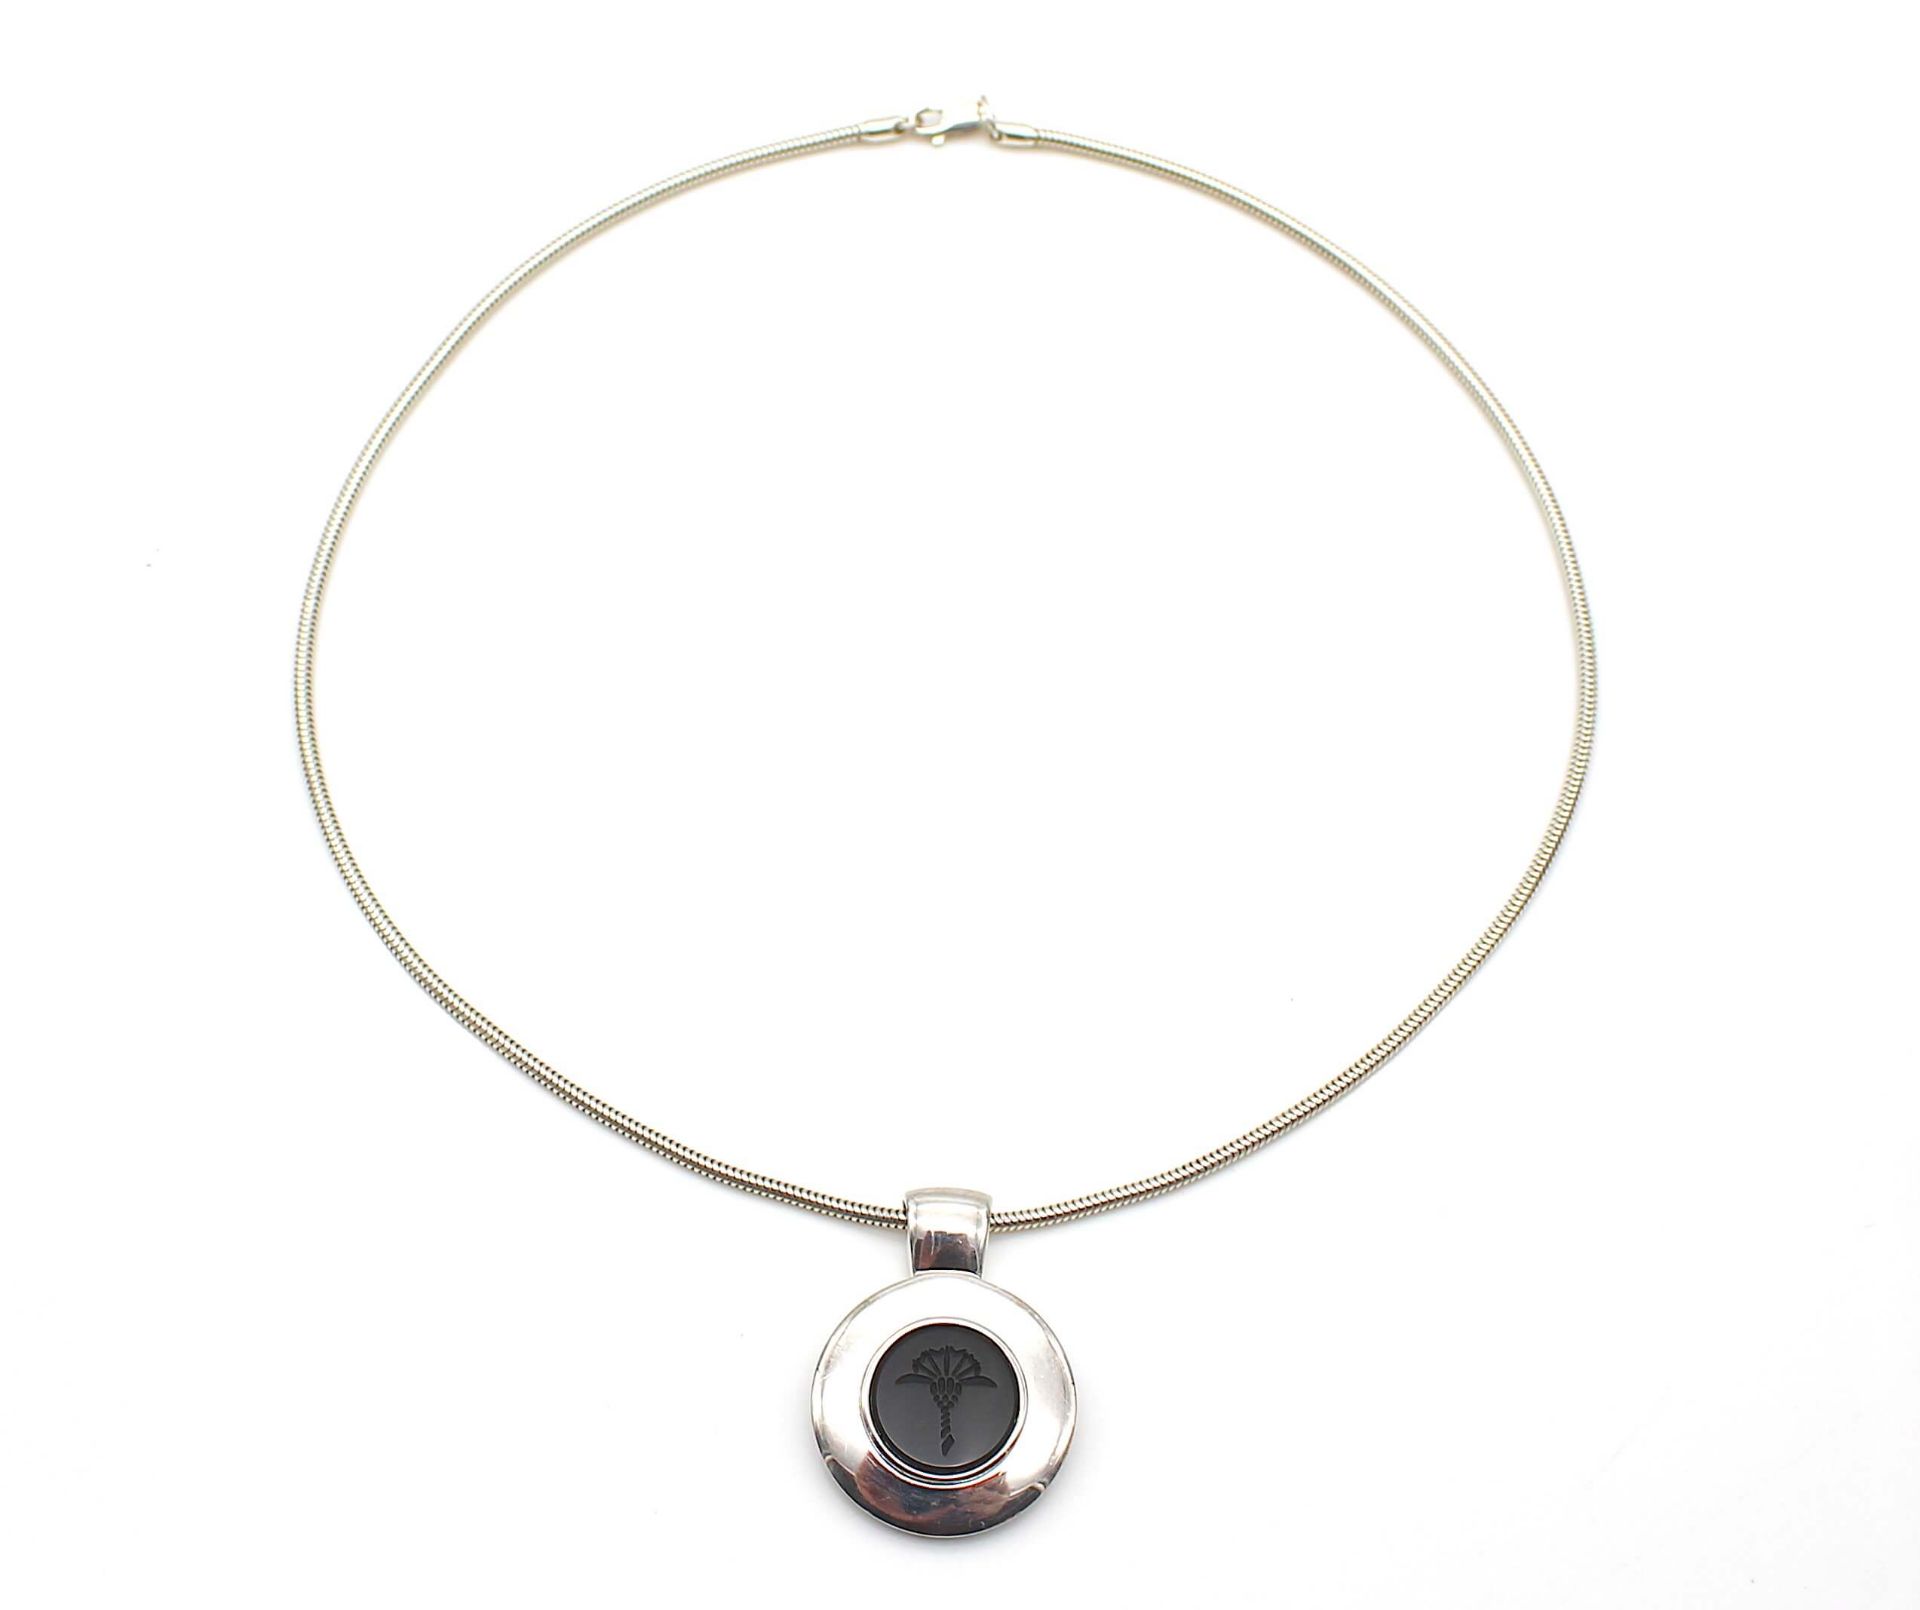 Necklace with a pendant by Joop made of 925 silver and an onyx.Weight 23 g, chain length 42 cm, - Bild 3 aus 3